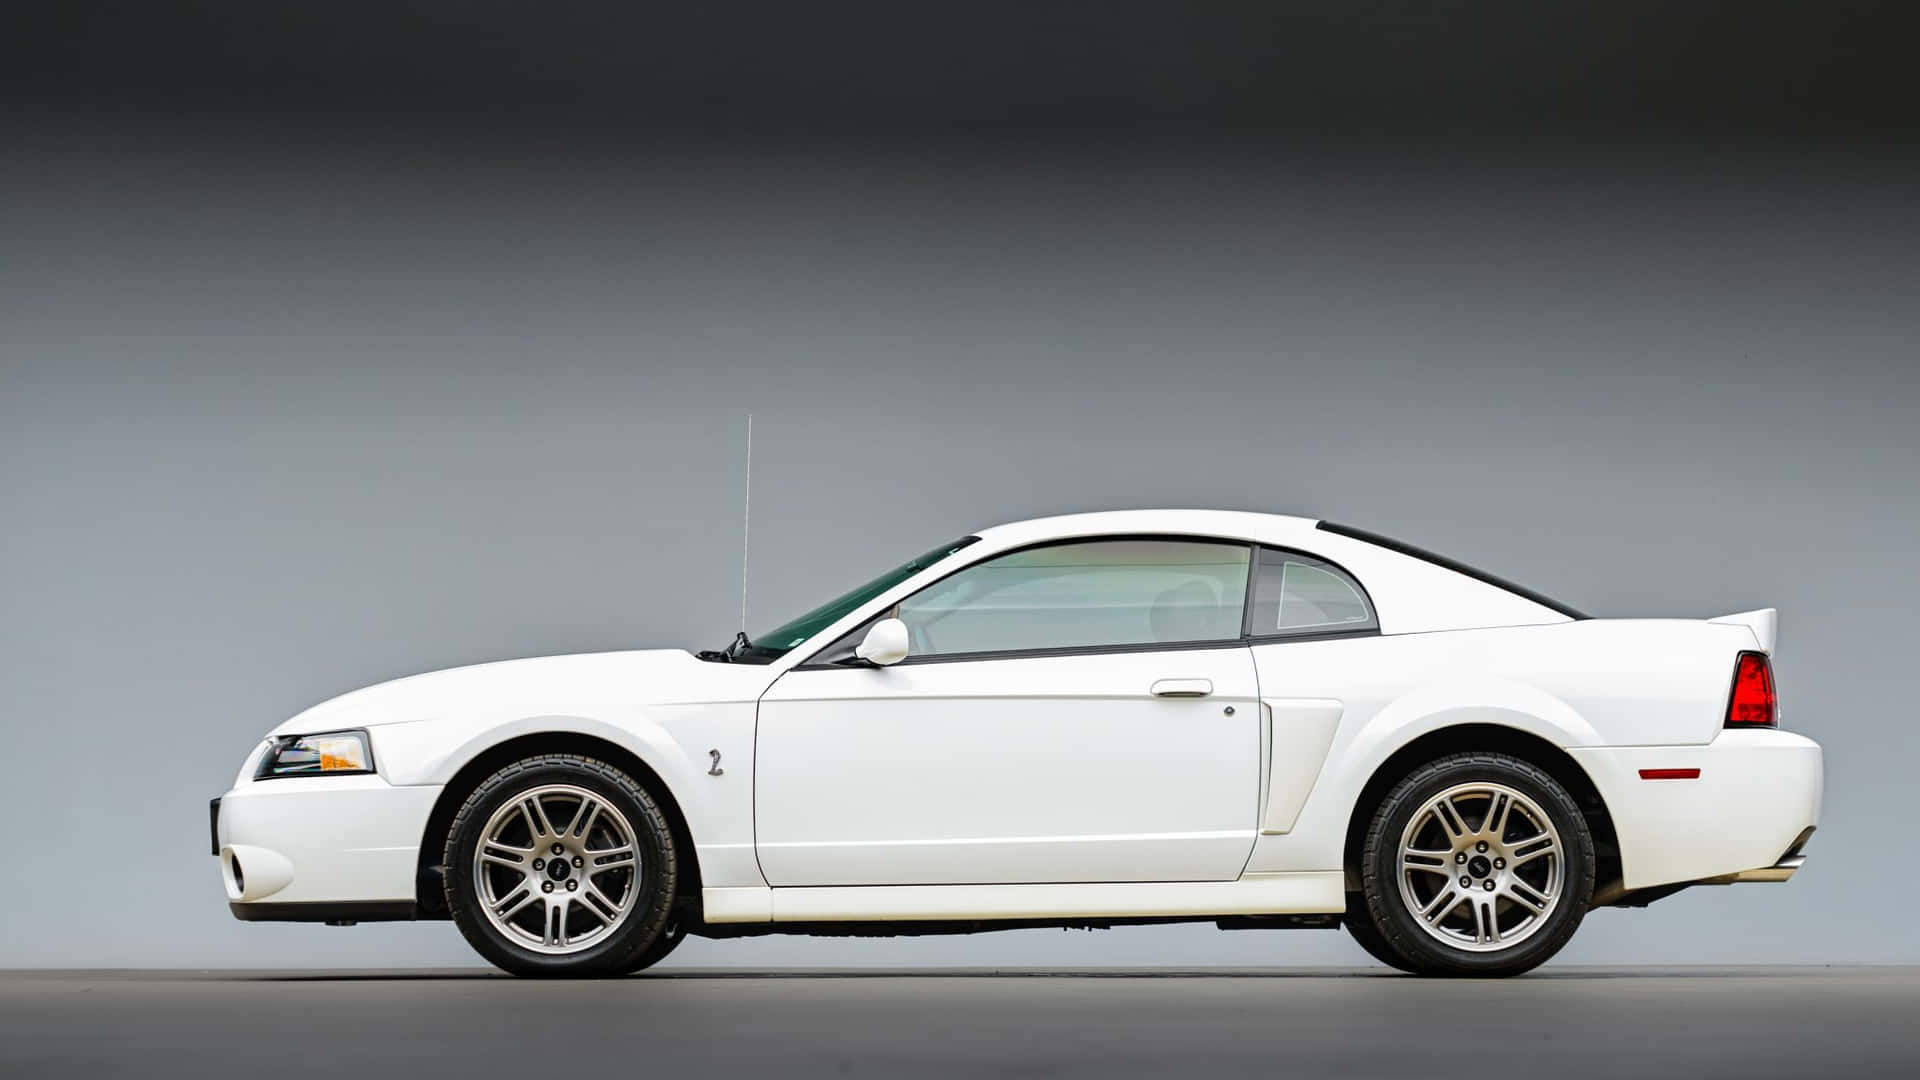 Powerful Ford Mustang Svt Cobra On The Road Wallpaper